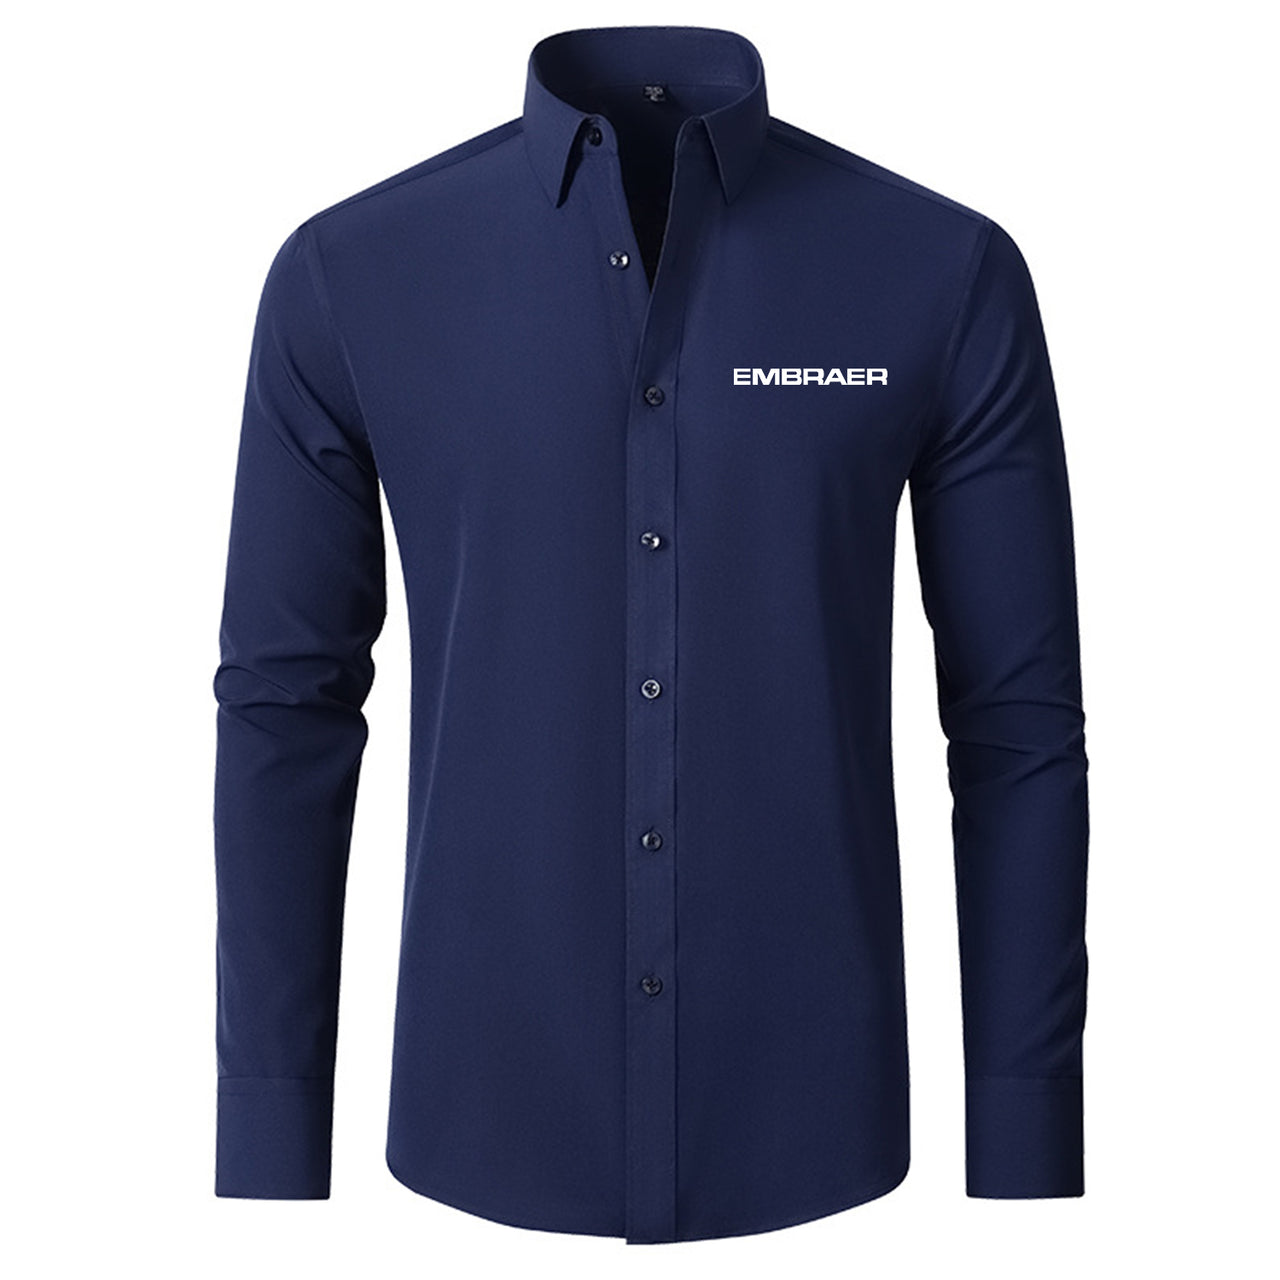 Embraer & Text Designed Long Sleeve Shirts